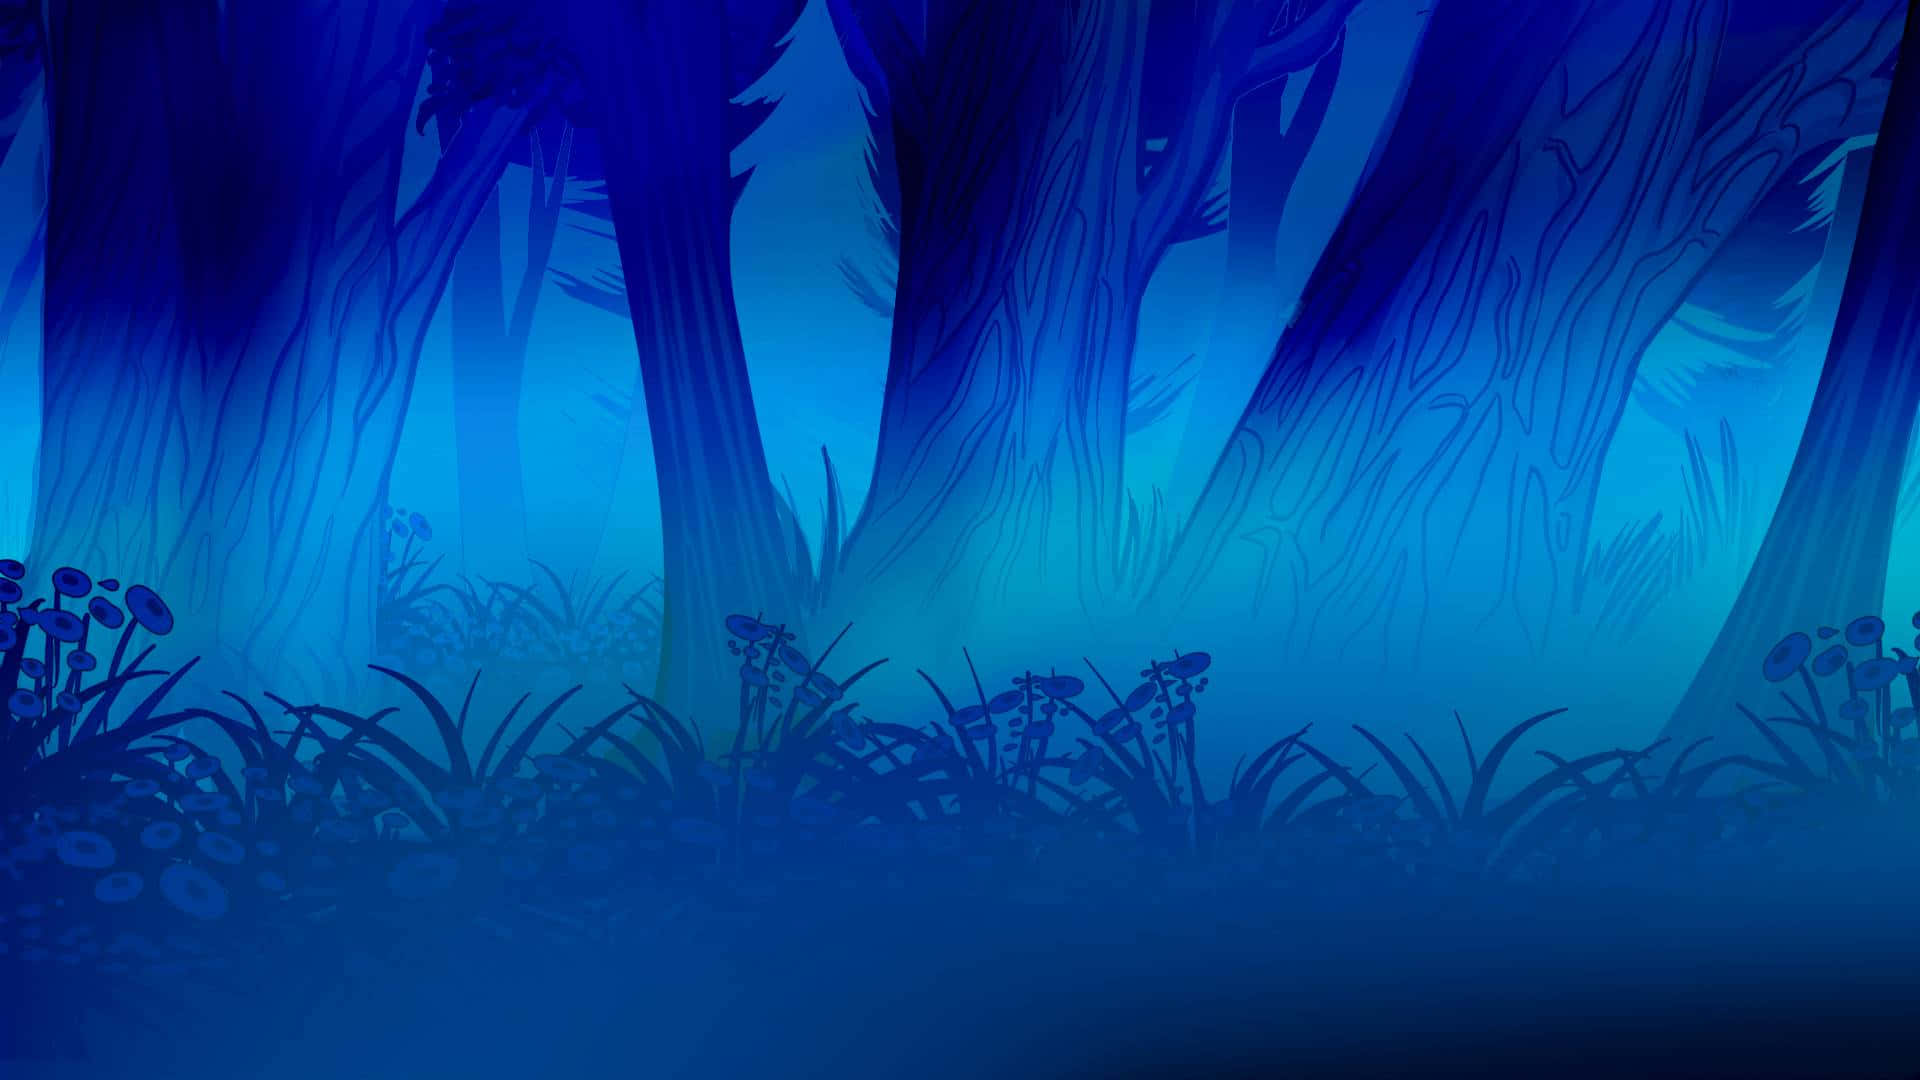 A mysterious and magical animated forest